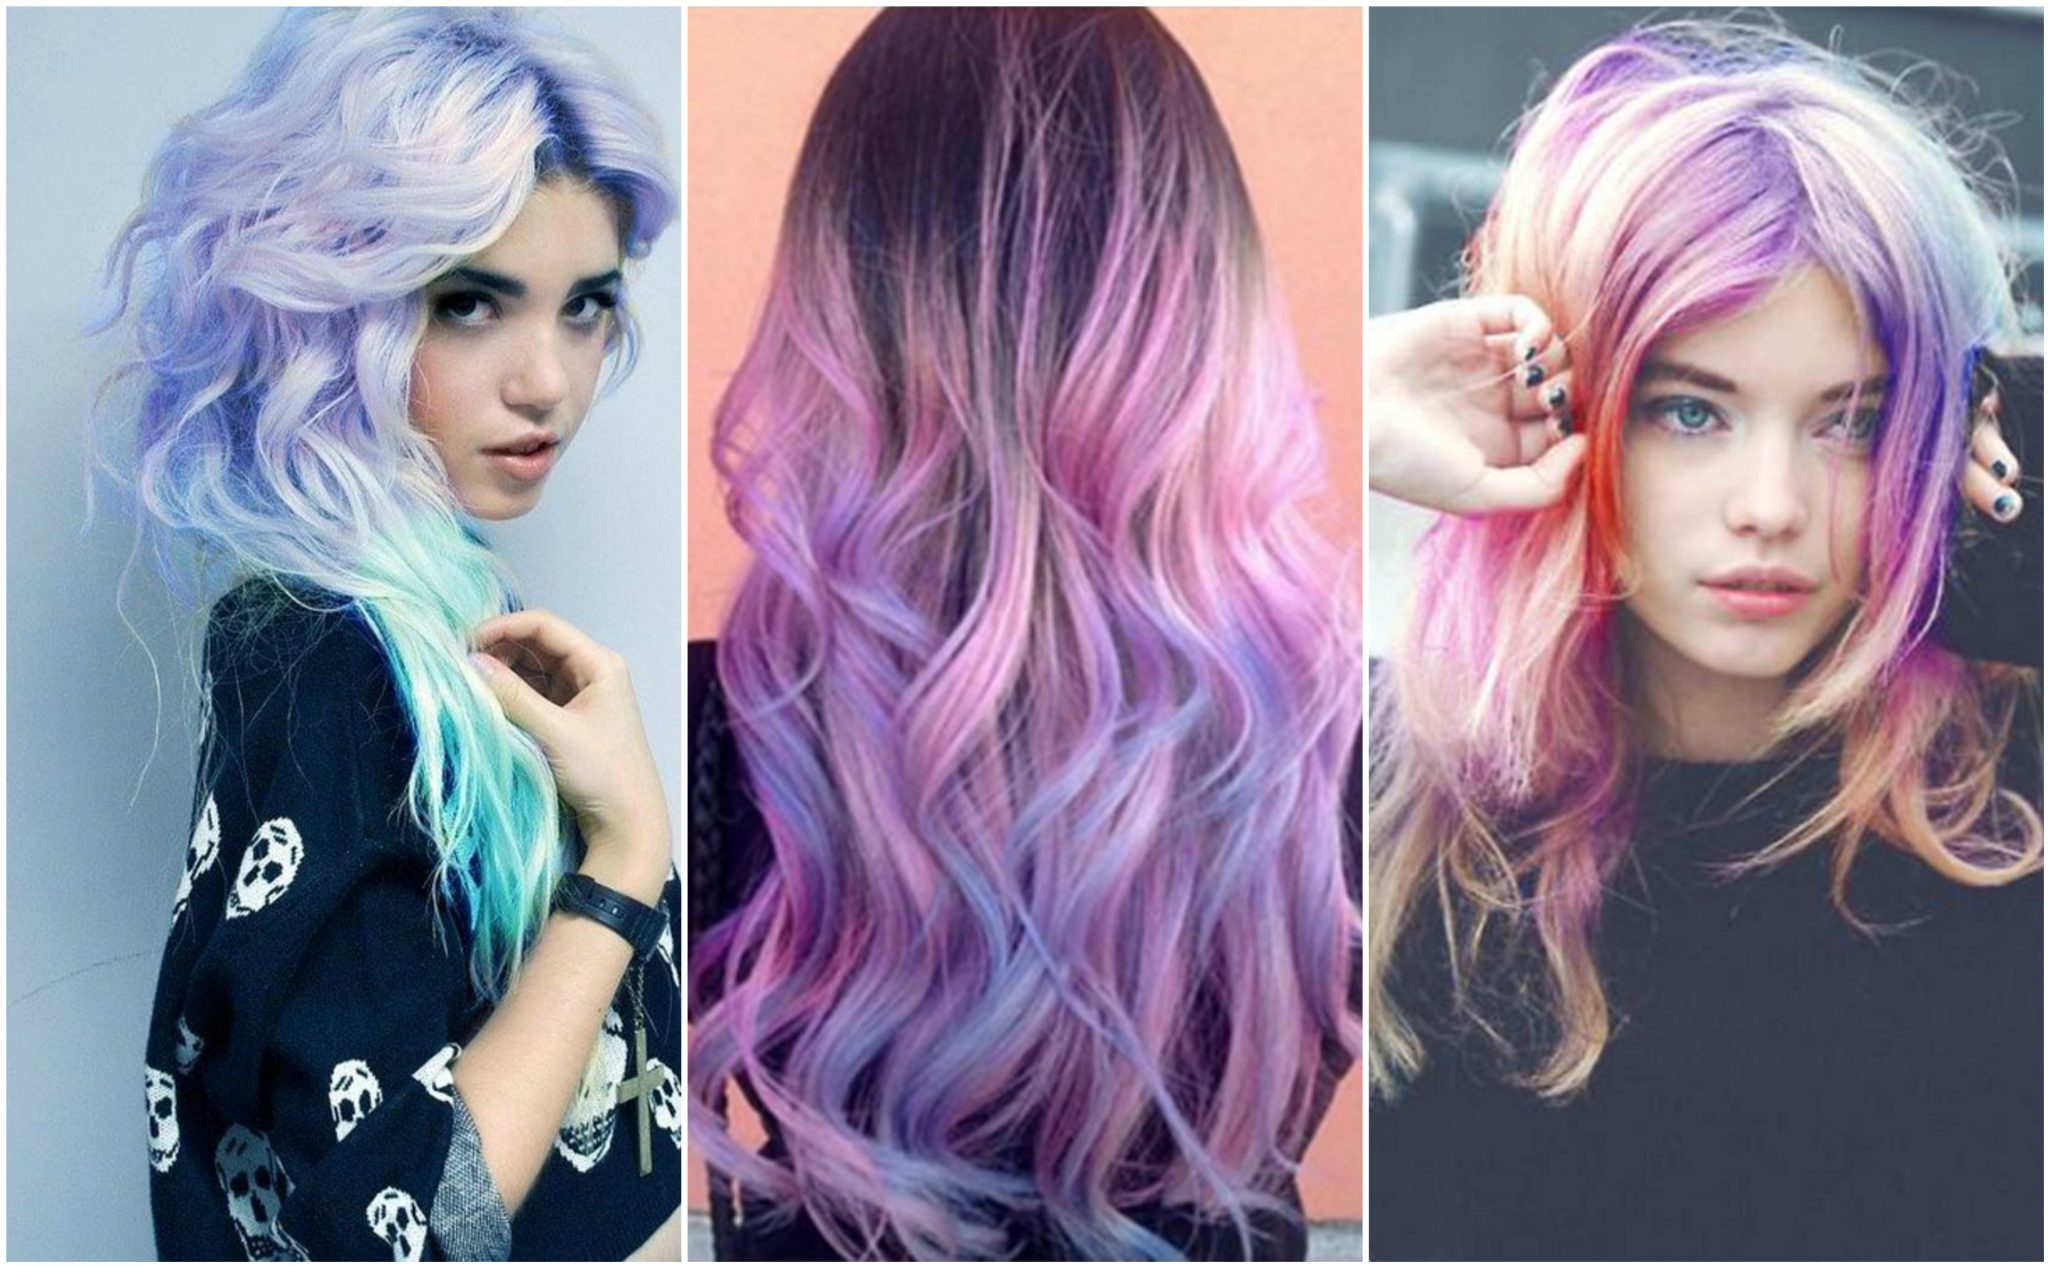 4. True Blue Hair Dye: How to Use and Achieve the Best Results - wide 7